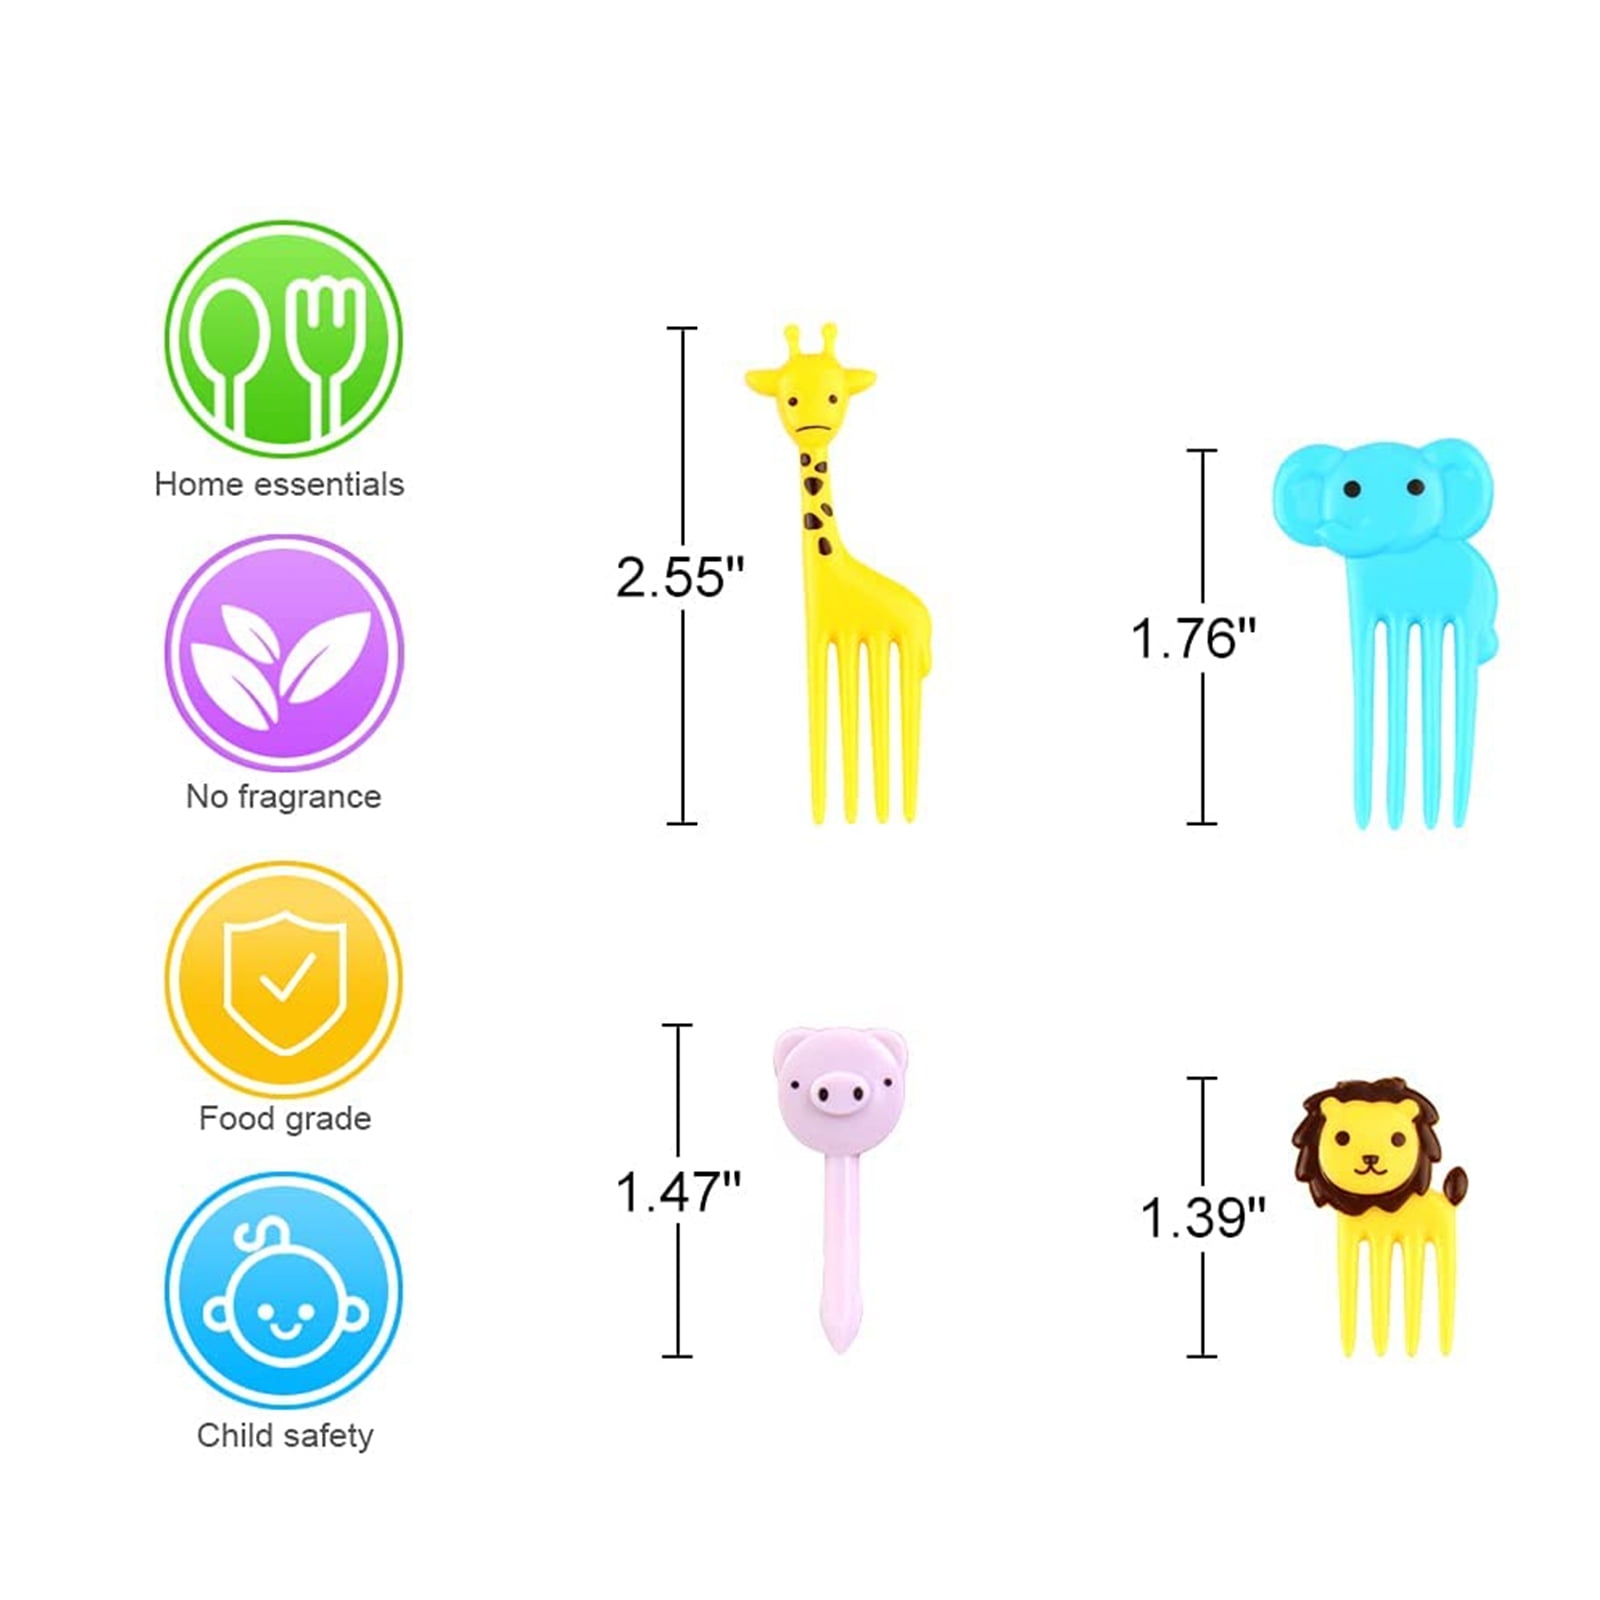 150PCS Animal Food Picks for Kids, Vicuna R Fun Kids Food Picks for Bento  Box Accessories, Reusable Toddler Fruit Toothpicks, Cute Kids Lunch